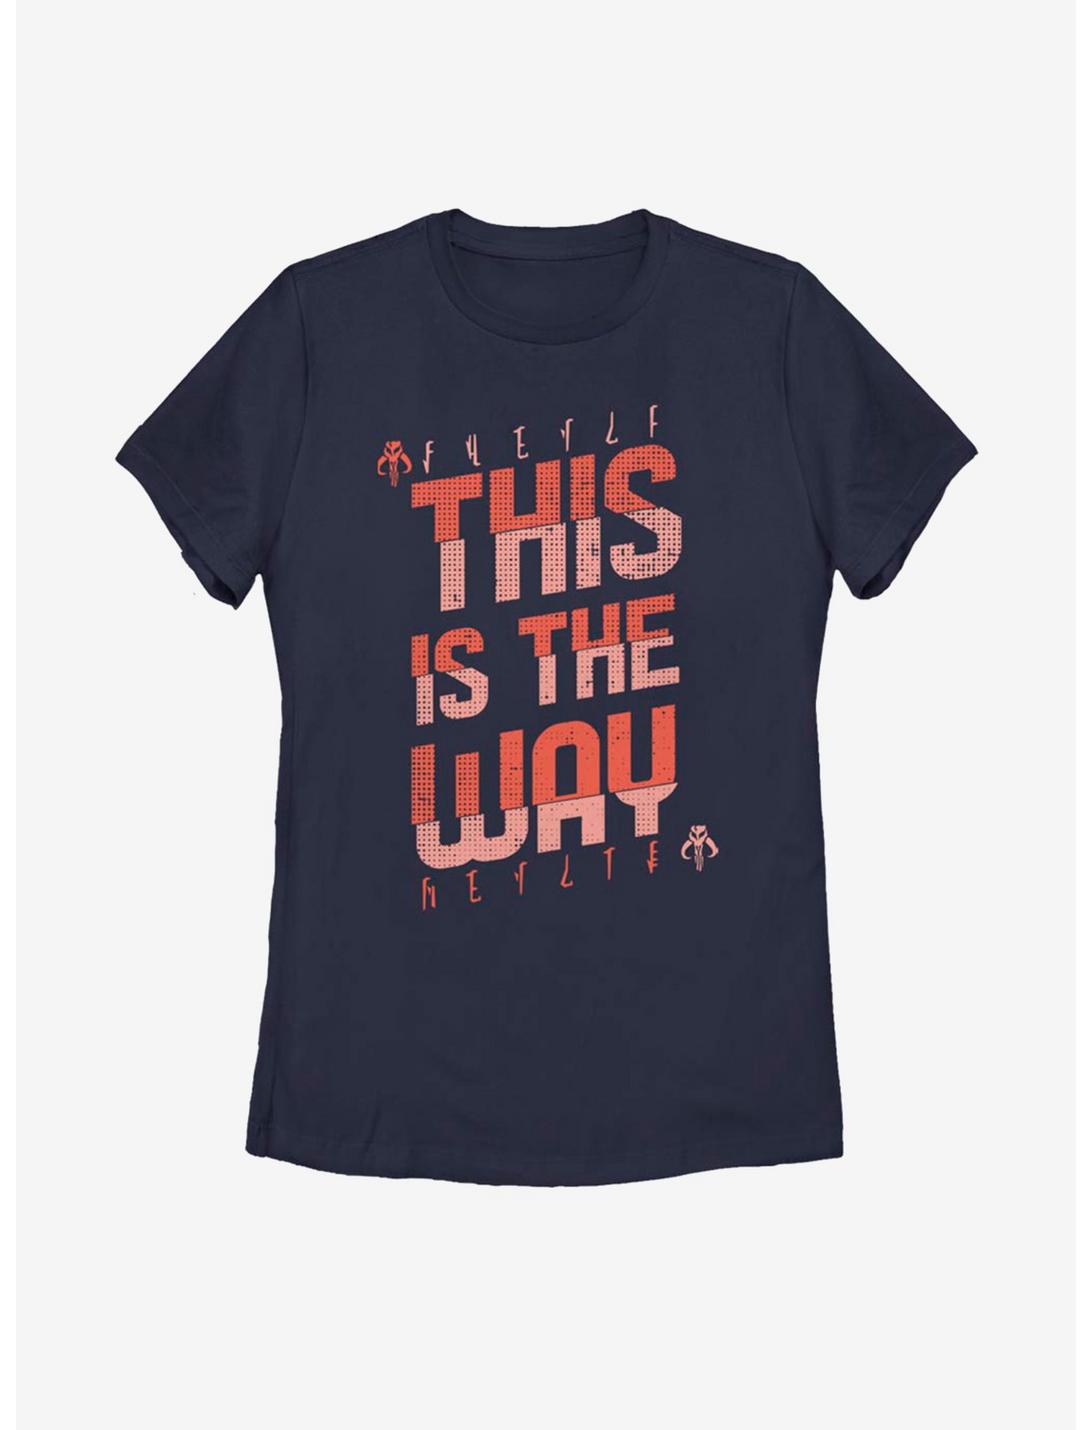 Star Wars The Mandalorian This Is The Way Red Script Womens T-Shirt, NAVY, hi-res